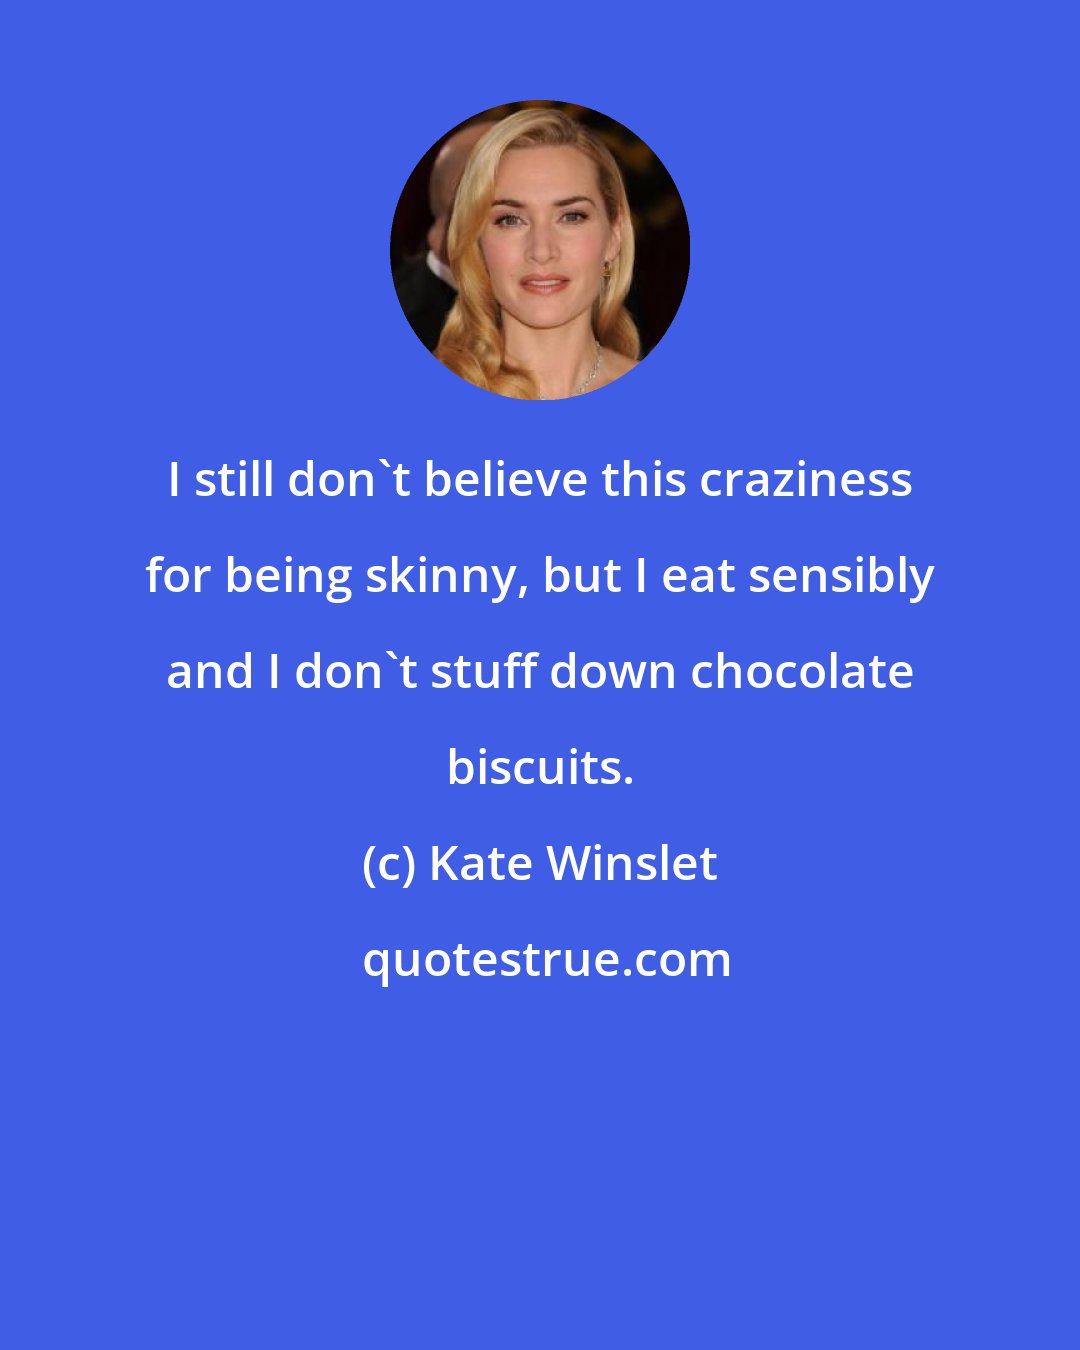 Kate Winslet: I still don't believe this craziness for being skinny, but I eat sensibly and I don't stuff down chocolate biscuits.